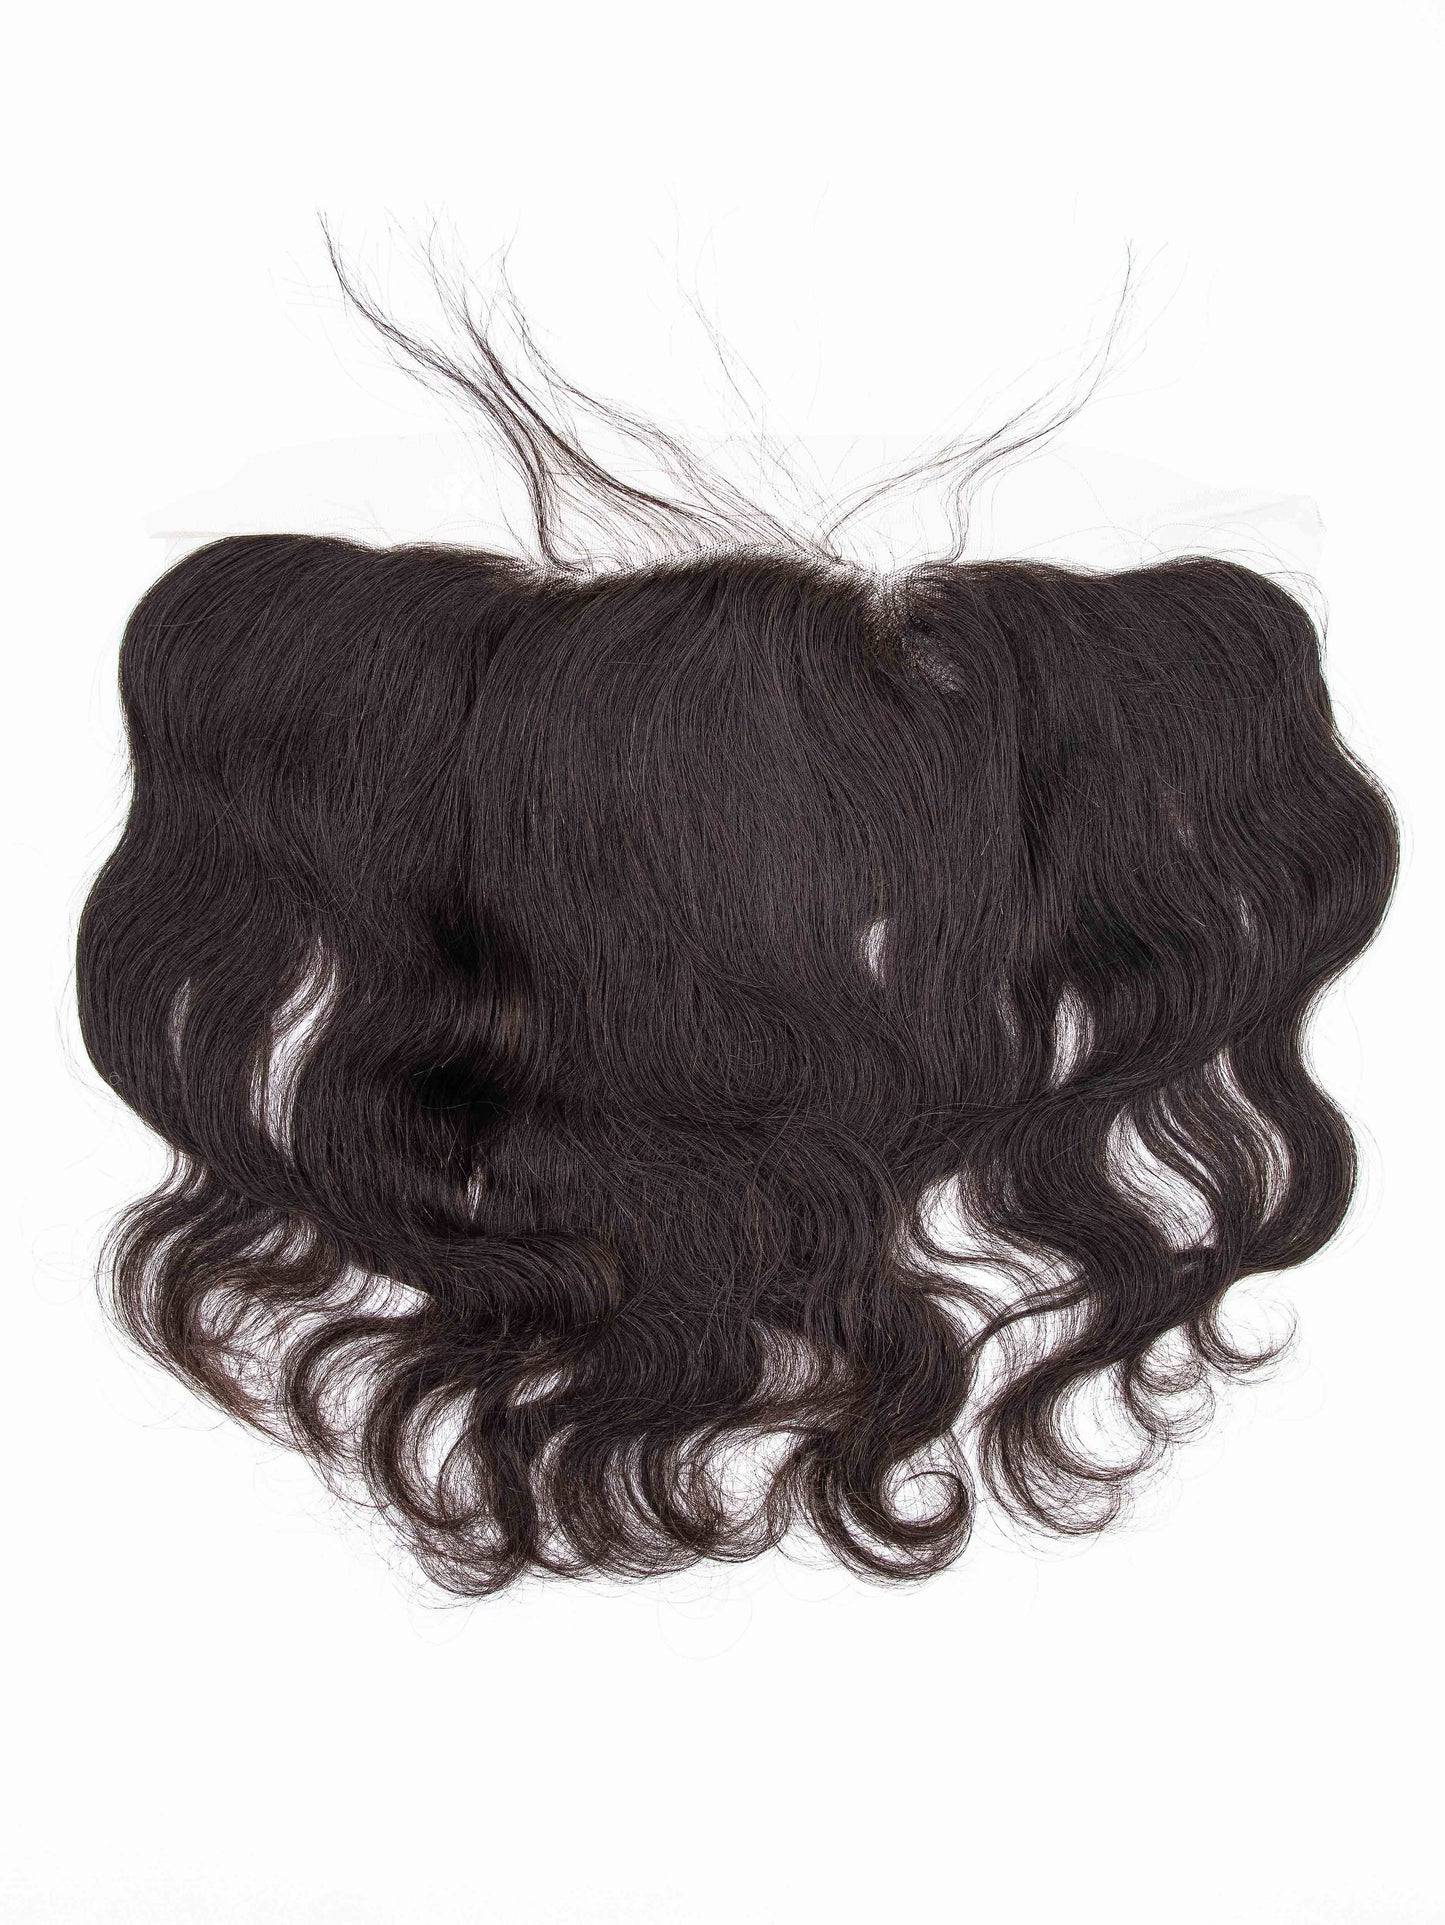 LACE FRONTALS